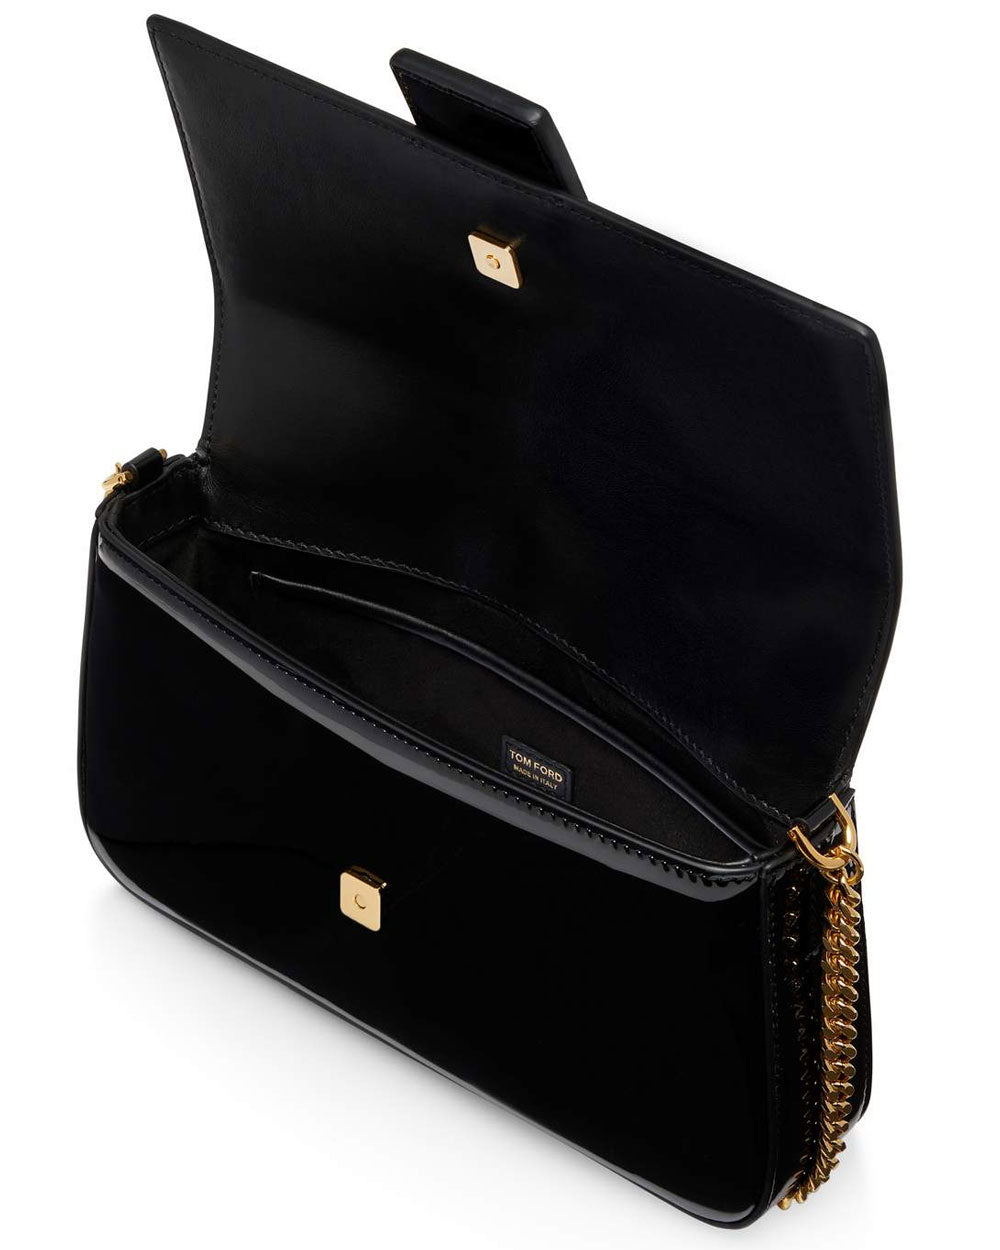 Patent Leather TF Chain Shoulder Bag in Black